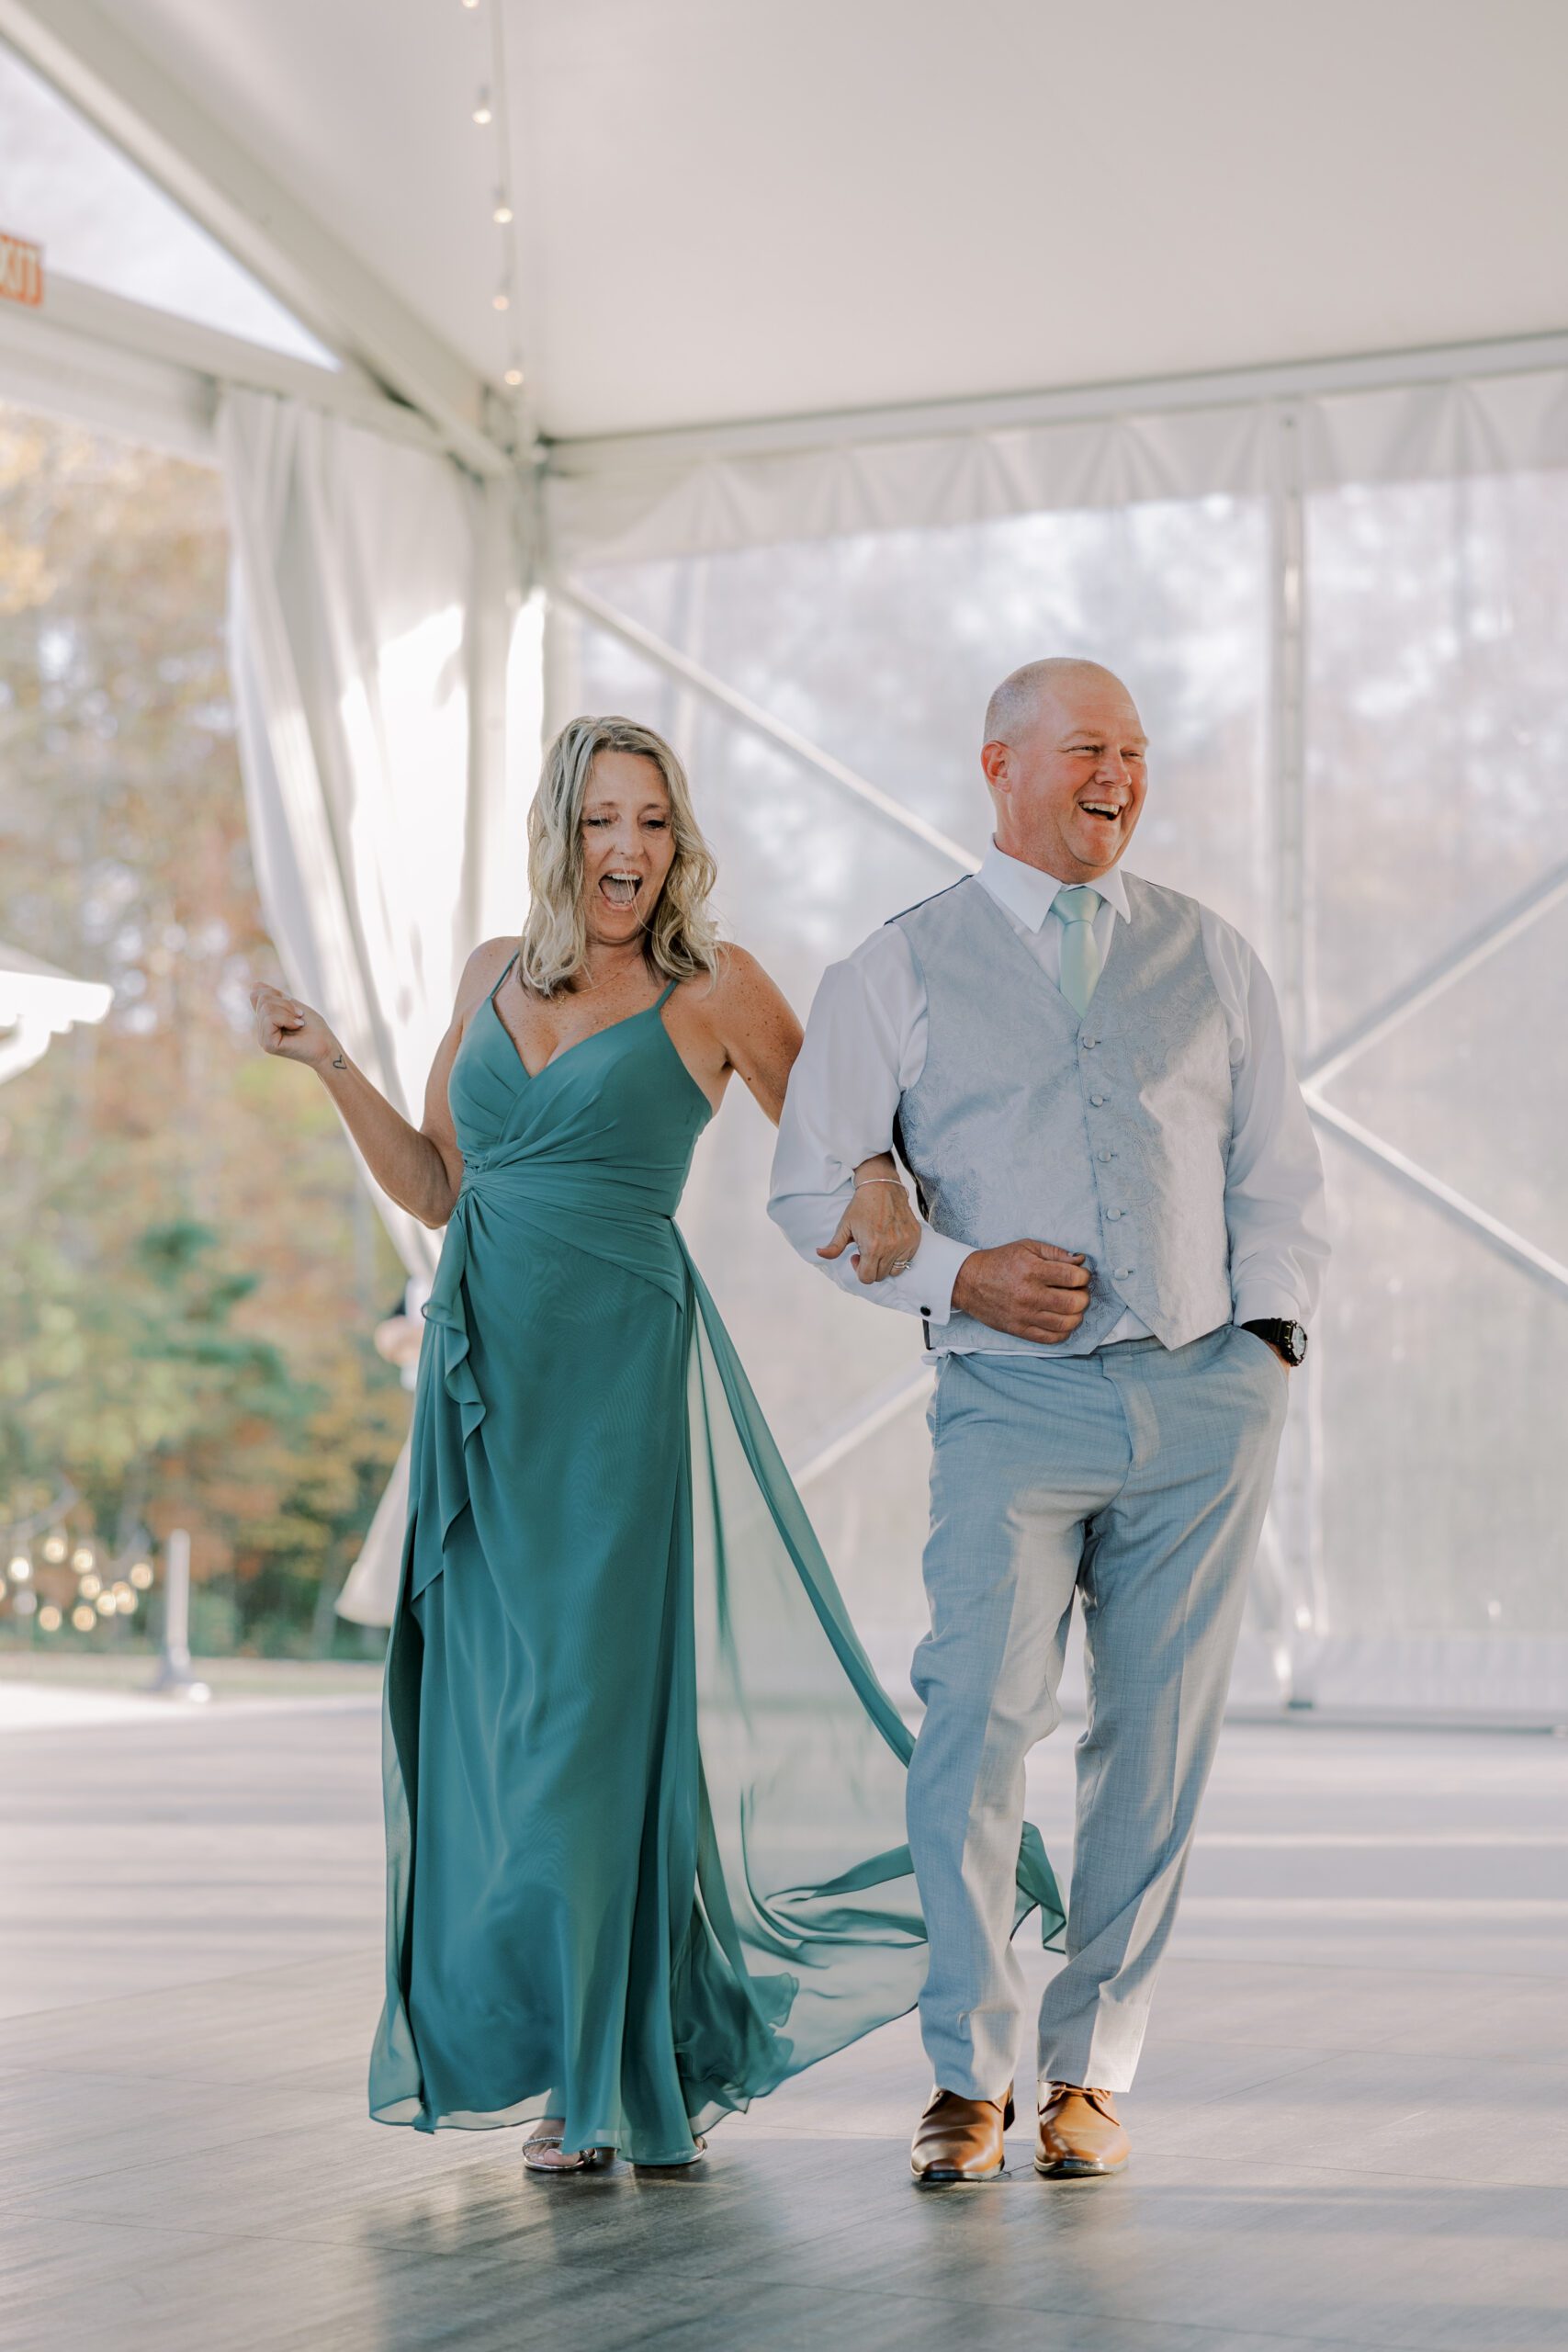 Bride's parents enter reception smiling and laughing, woman is wearing a dark teal colored dress and man is in light grey suit without the jacket